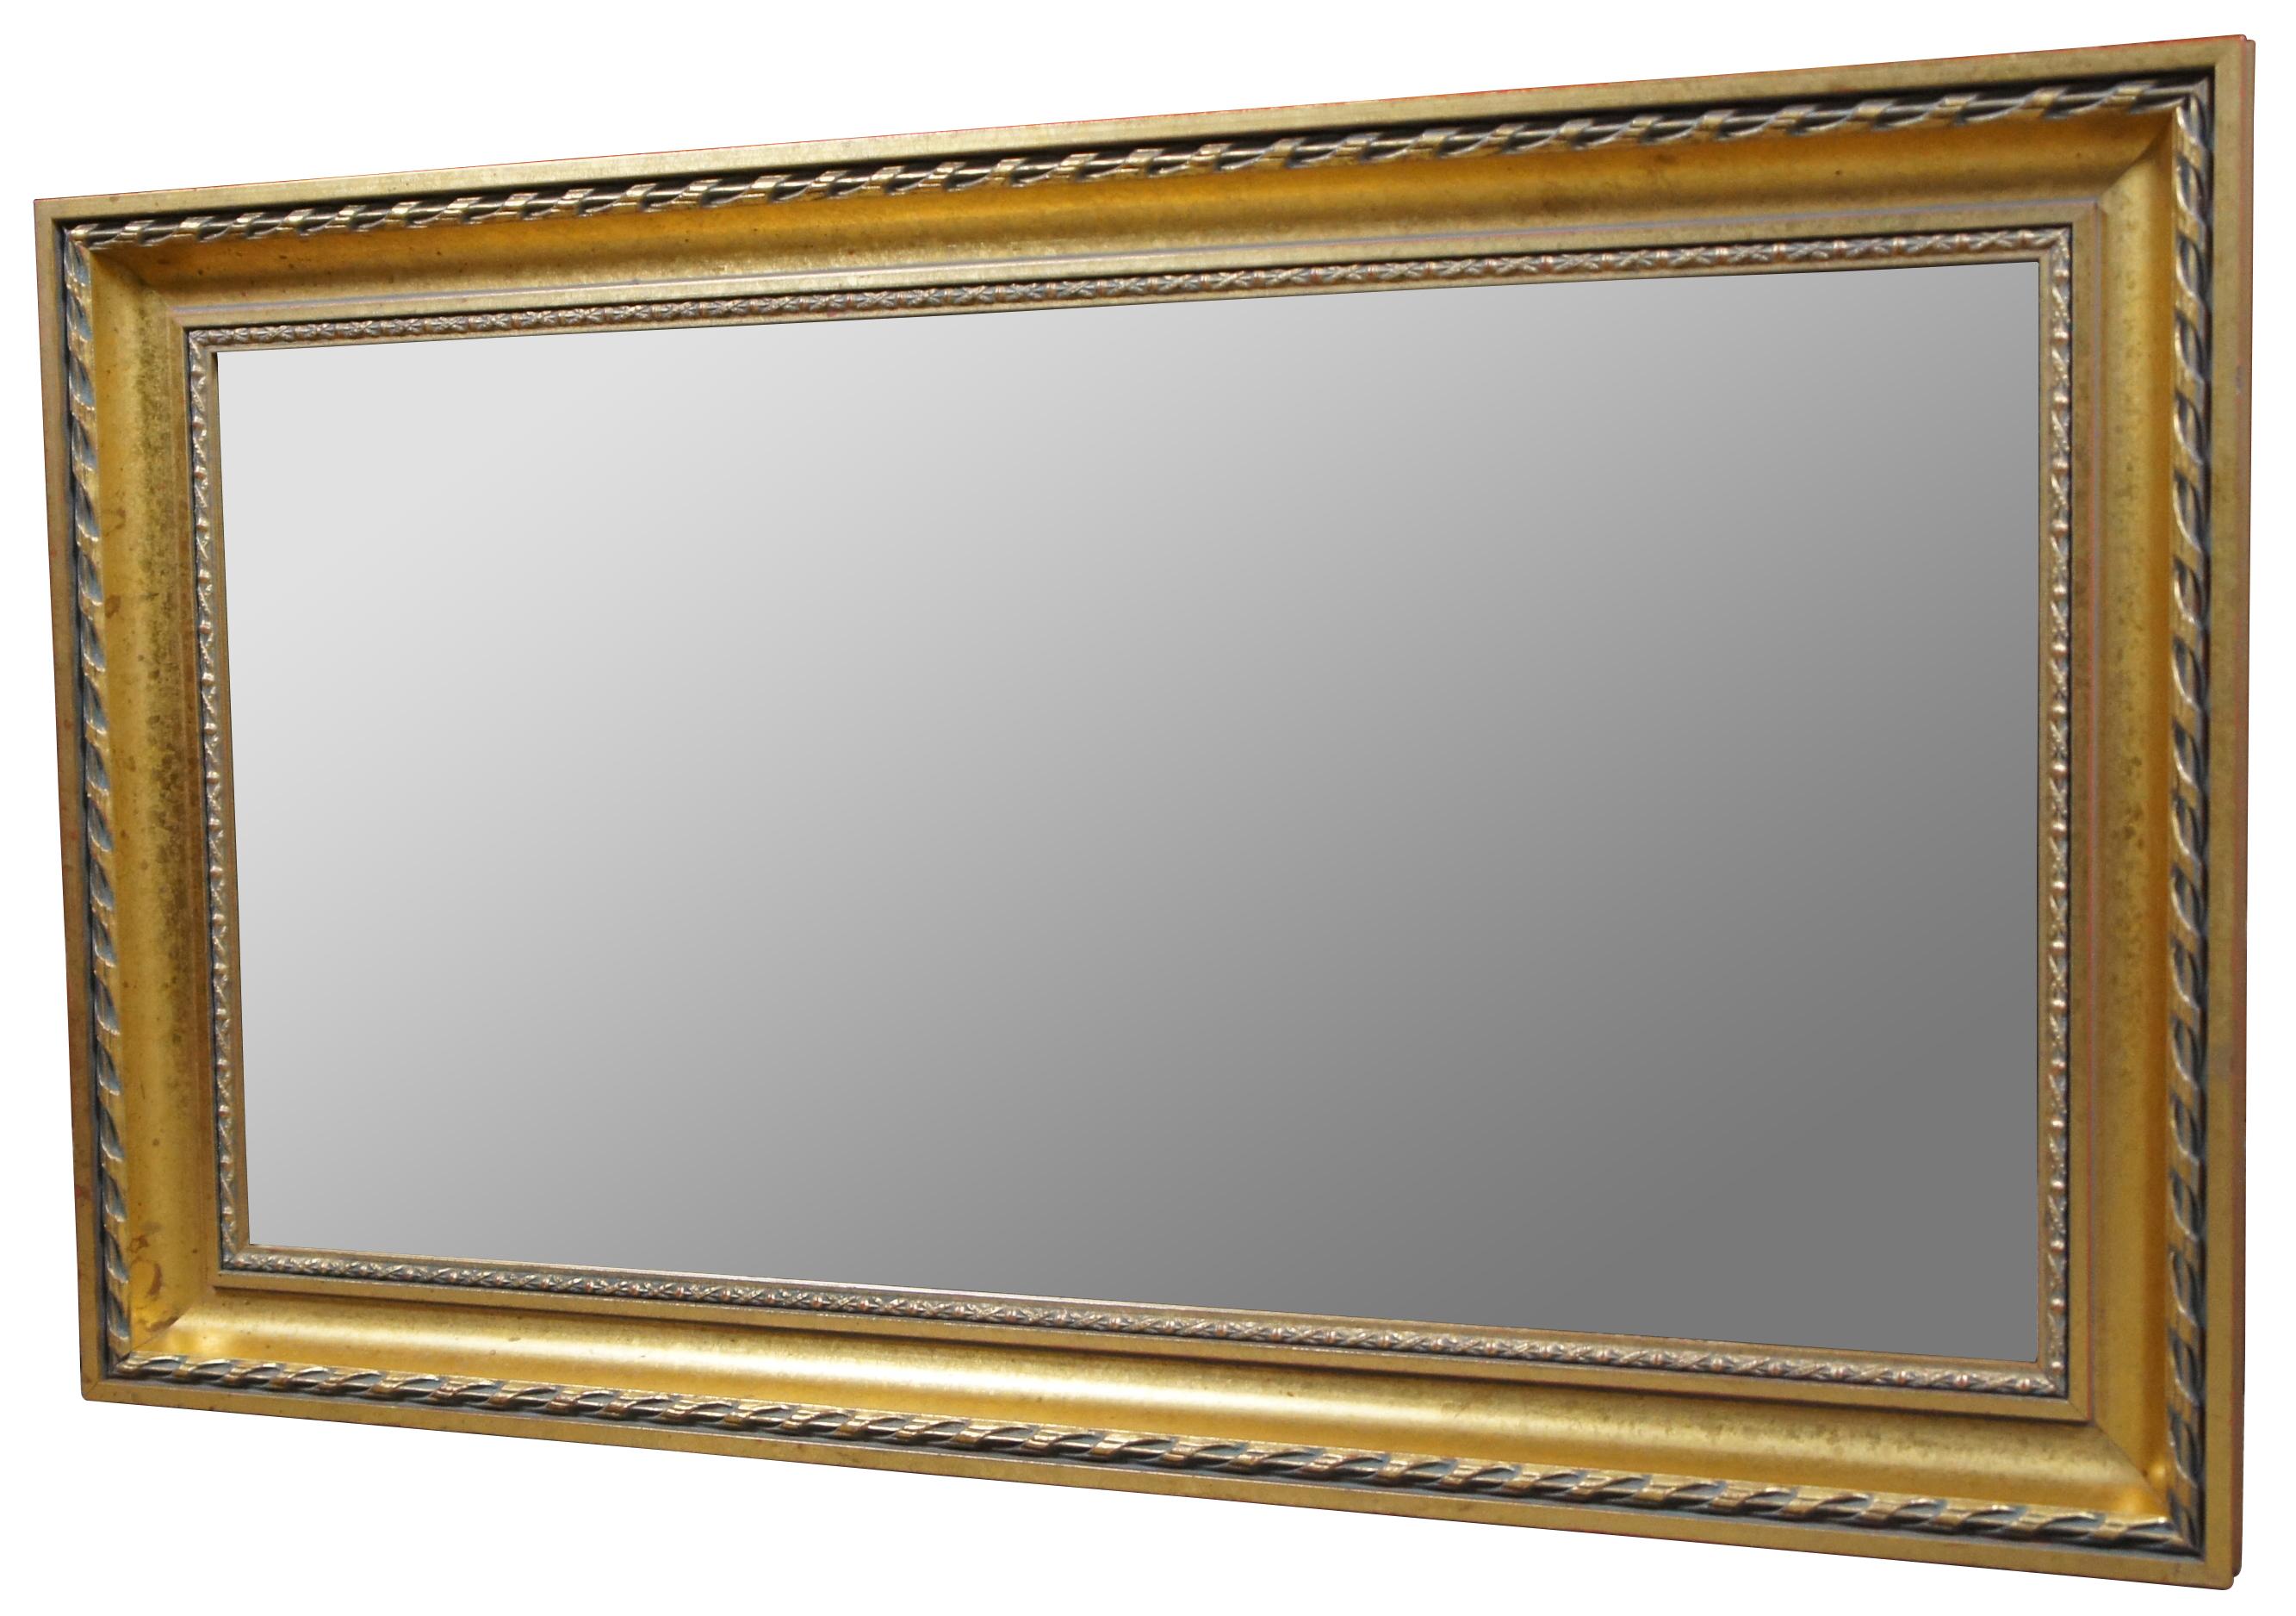 Hollywood Regency or Louis XV style gilt wood wall mirror by the H.A. DeNunzio Company. Features a rectangular frame with ribbon trim outside of a french inspired X patterned trim and beveled glass mirror.

Measures: 20.25” x 1.75” x 34” / Mirror